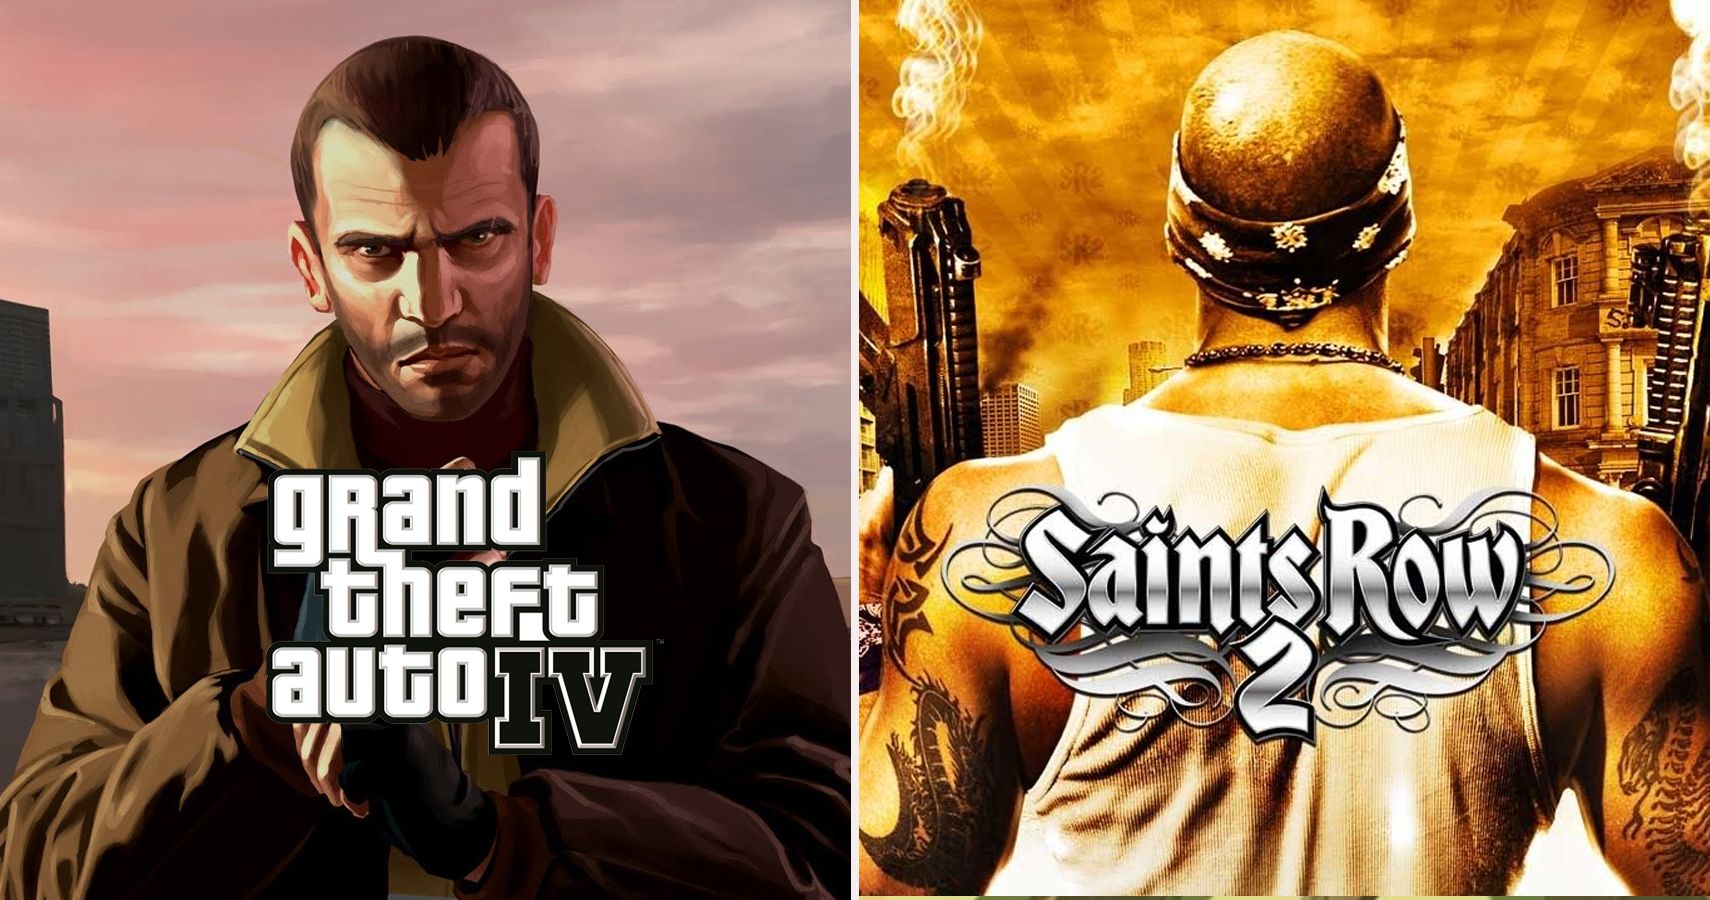 Grand Theft Auto IV' delivers more than mayhem